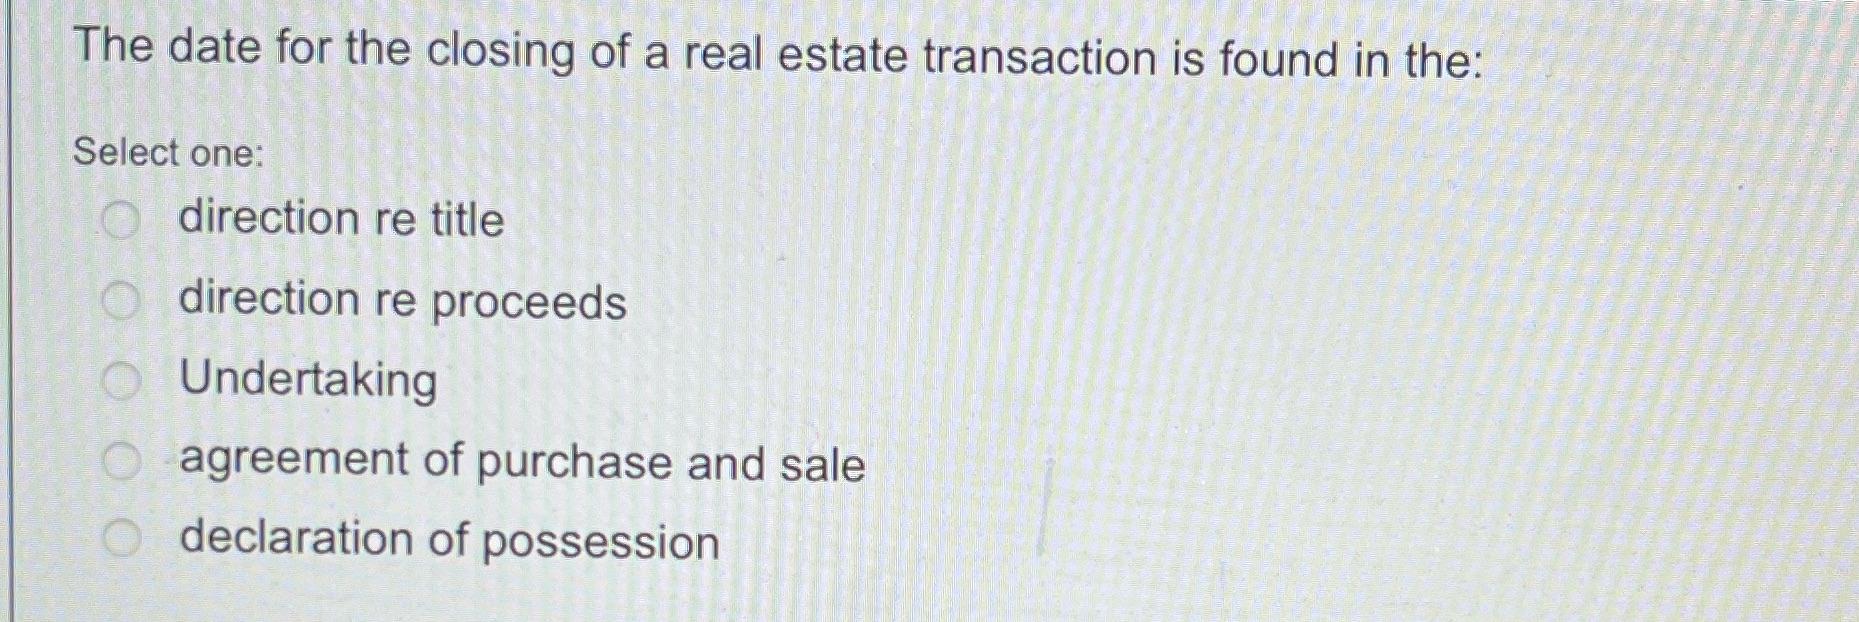 The date for the closing of a real estate transaction is found in the: Select one: O direction re title O